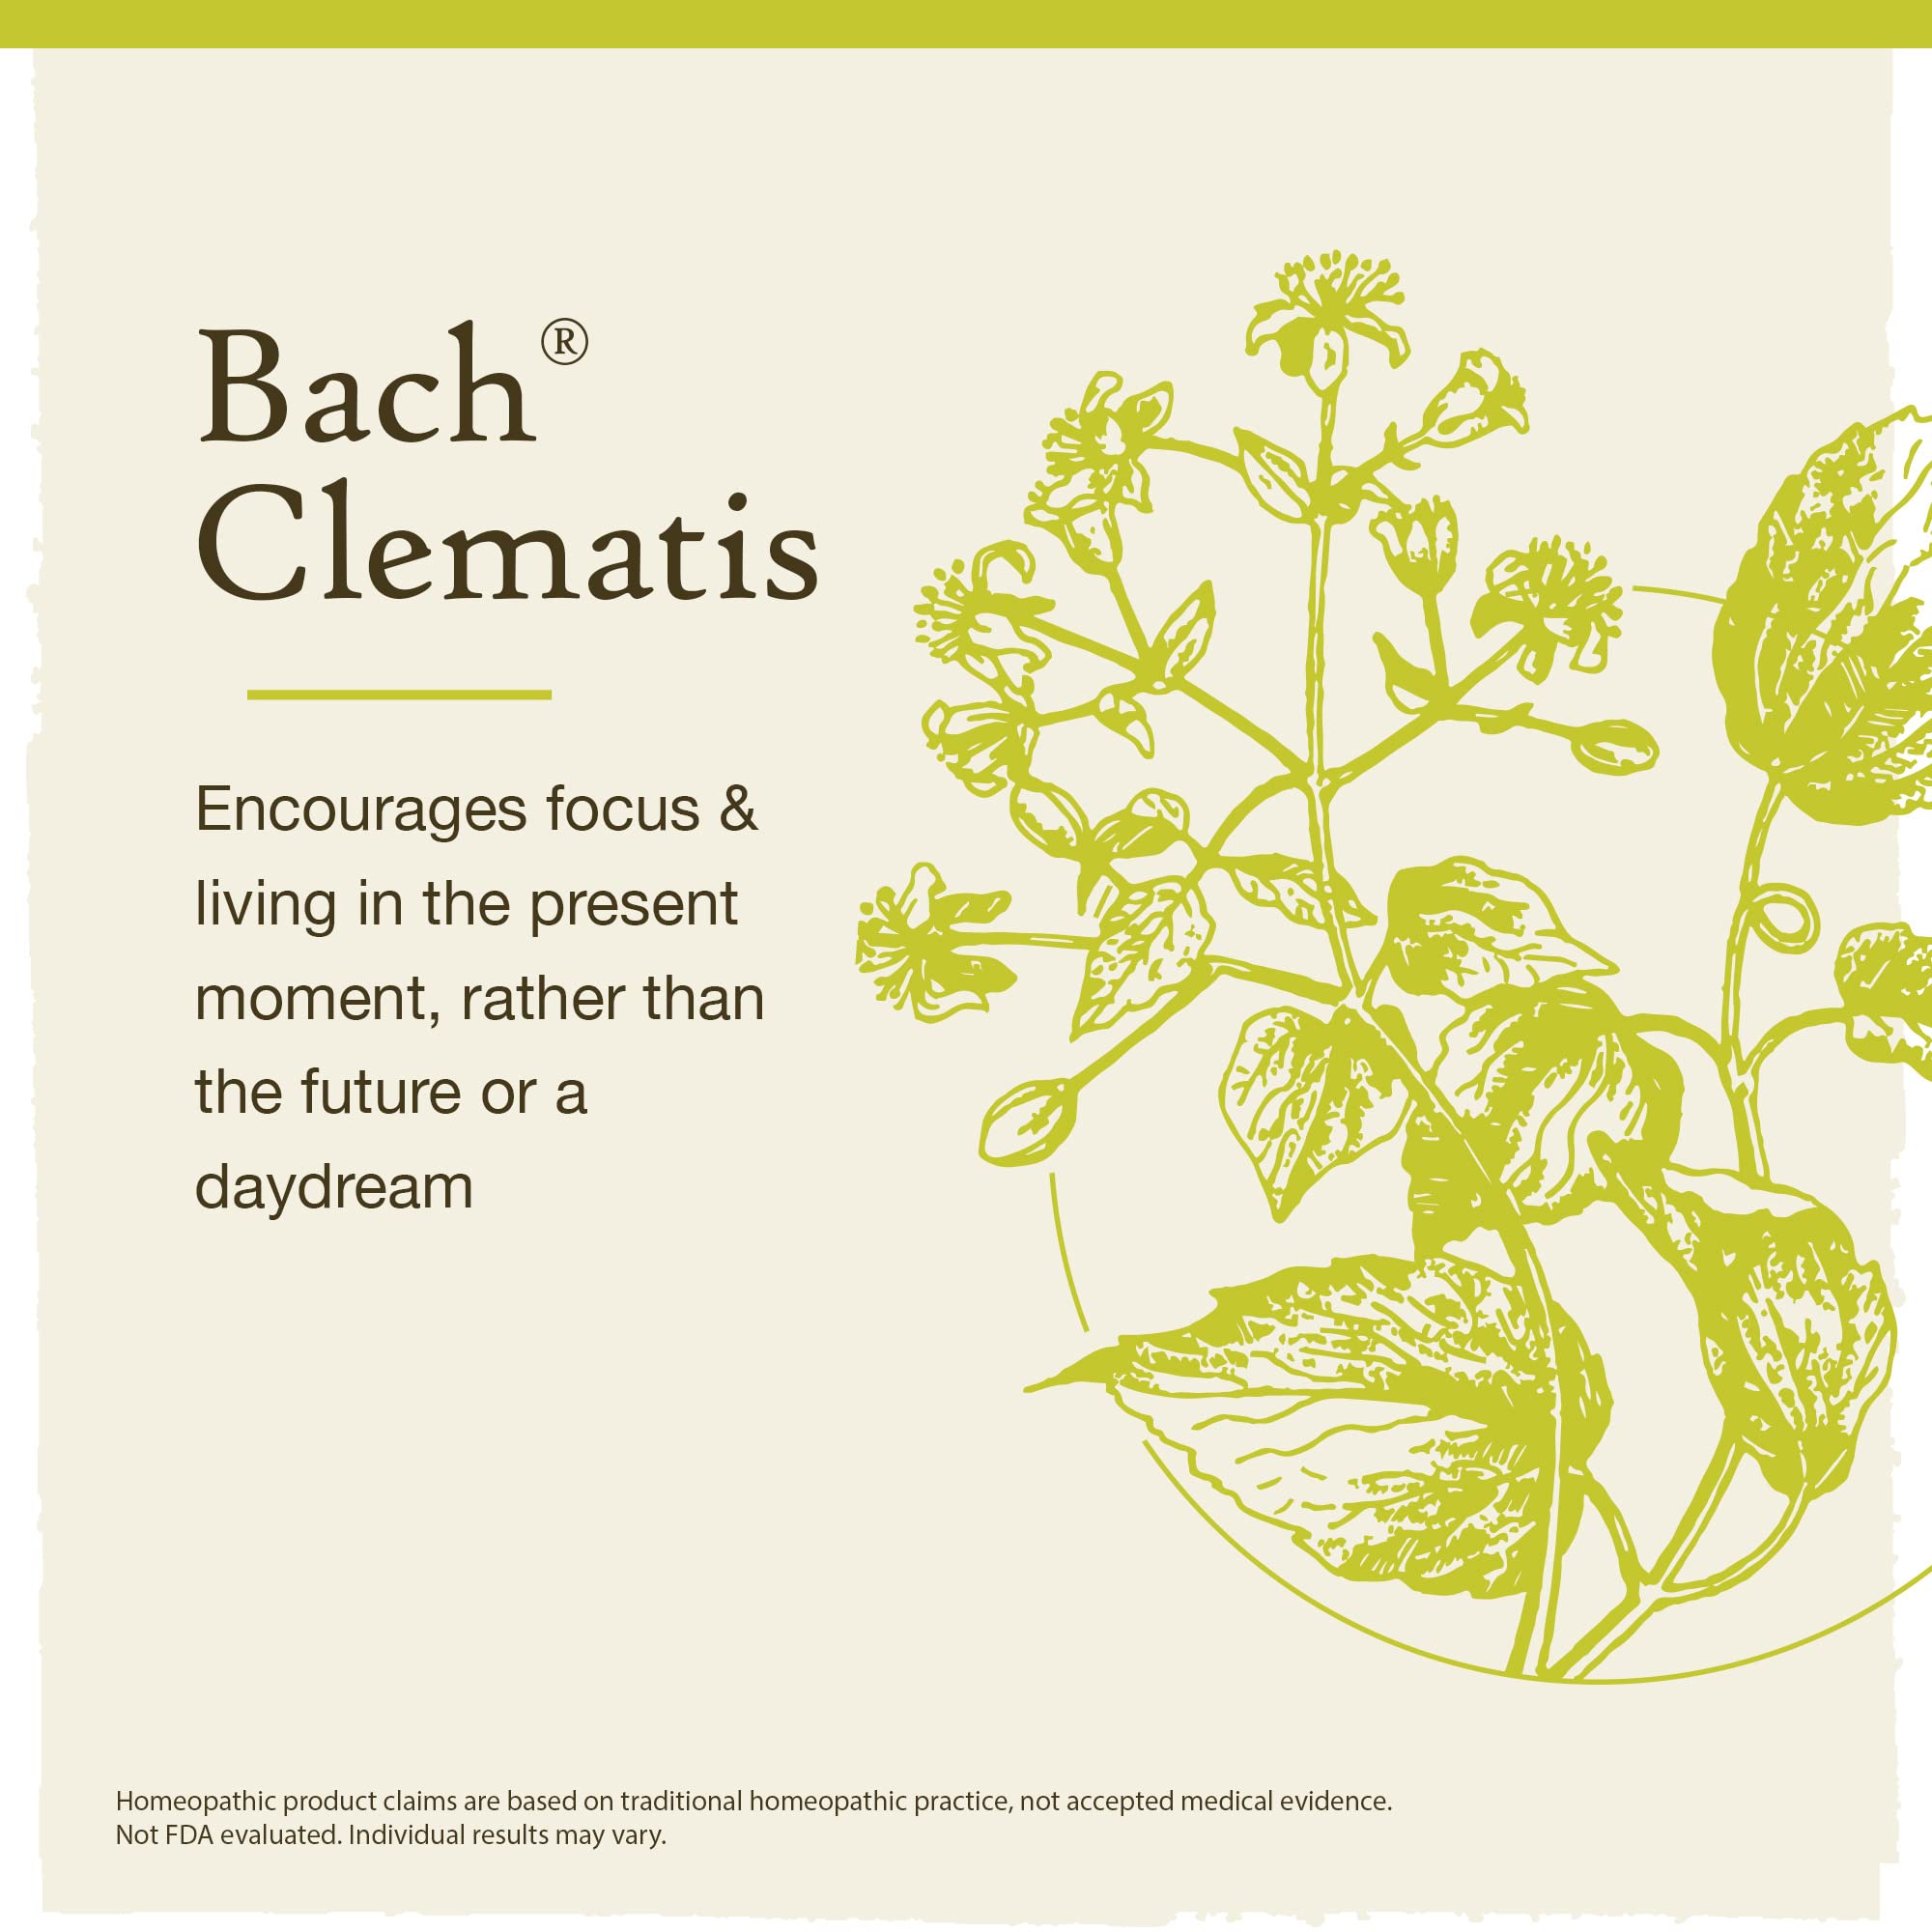 Bach Original Flower Remedies, Clematis for Focus and Concentration (Non-Alcohol Formula), Natural Homeopathic Flower Essence, Holistic Wellness and Stress Relief, Vegan, 10mL Dropper